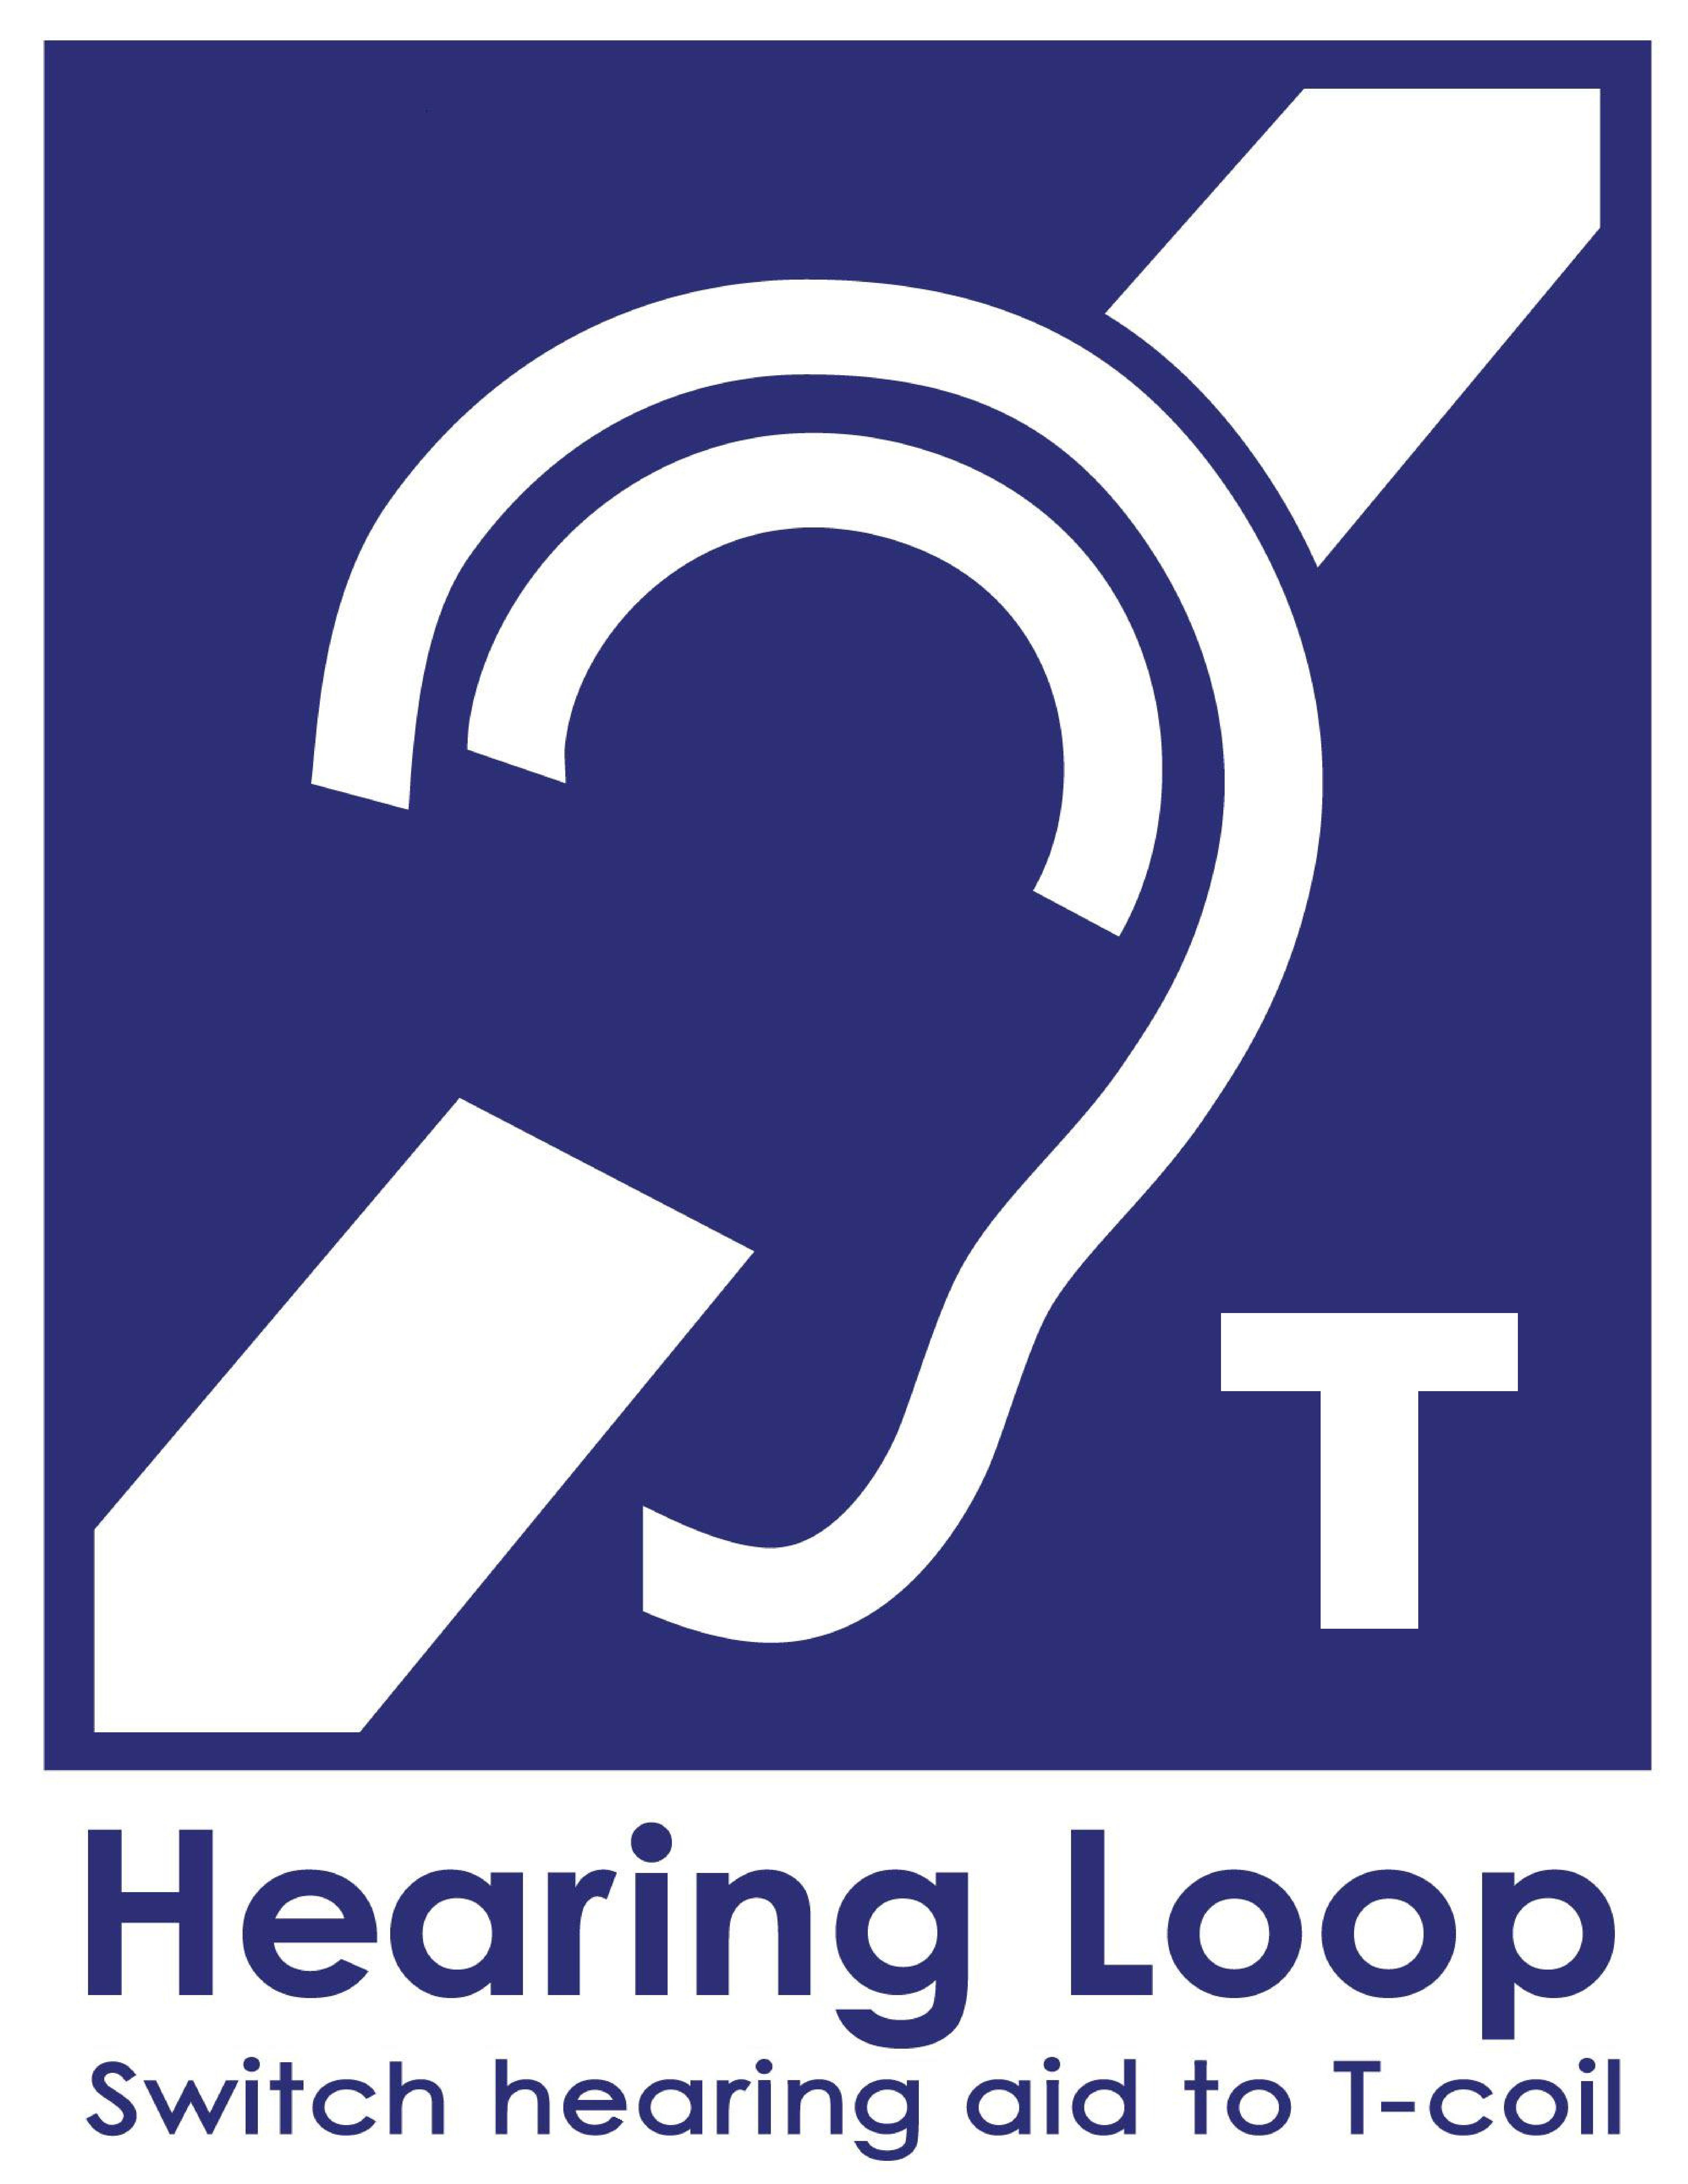 Loop Logo - About the Logo